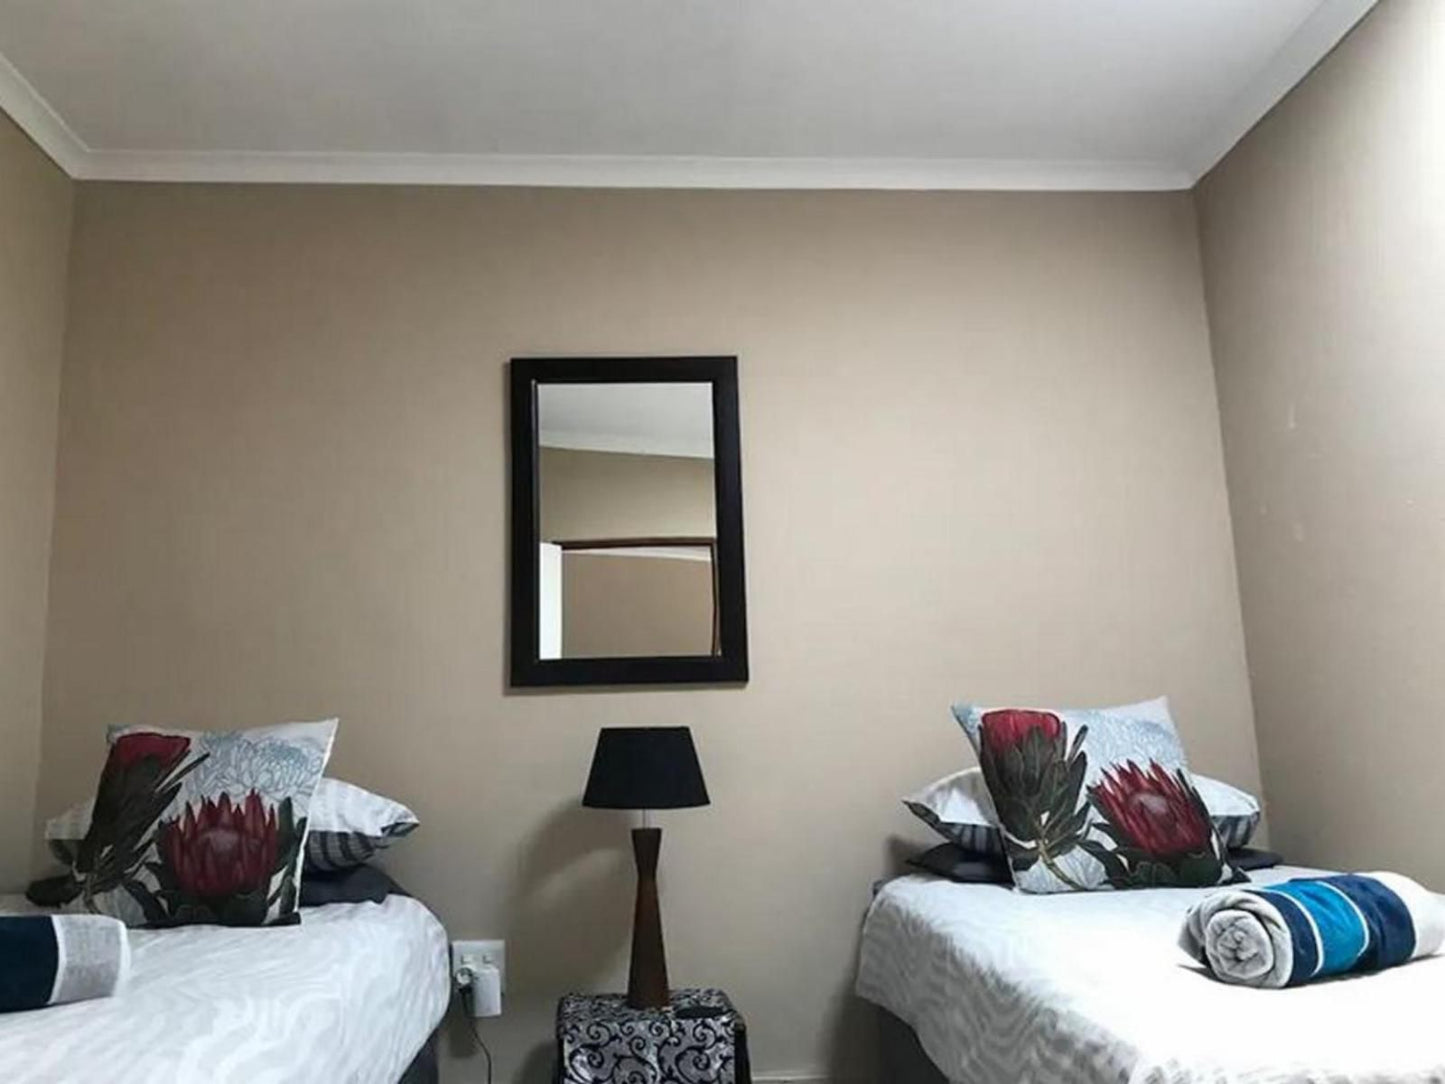 Authentic Newlands Newlands Cape Town Western Cape South Africa Unsaturated, Bedroom